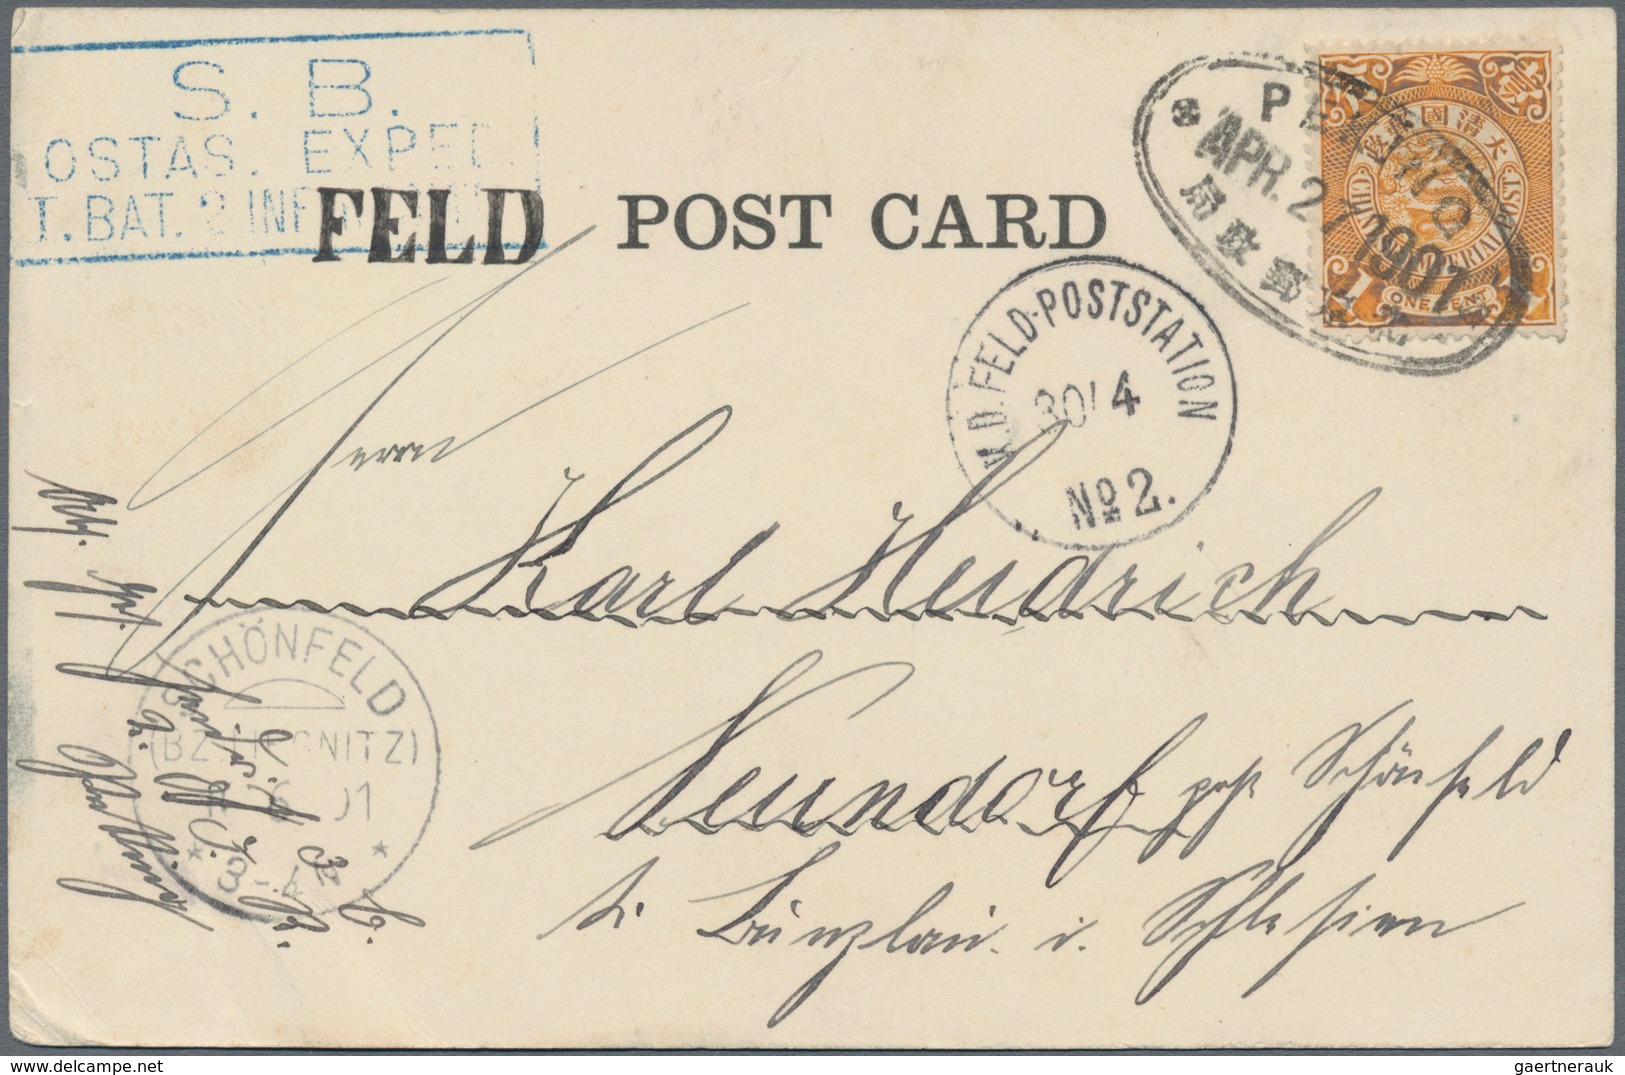 China - Fremde Postanstalten / Foreign Offices: Germany, 1901, Field Post Offices: Ppc (Peking) W. " - Other & Unclassified